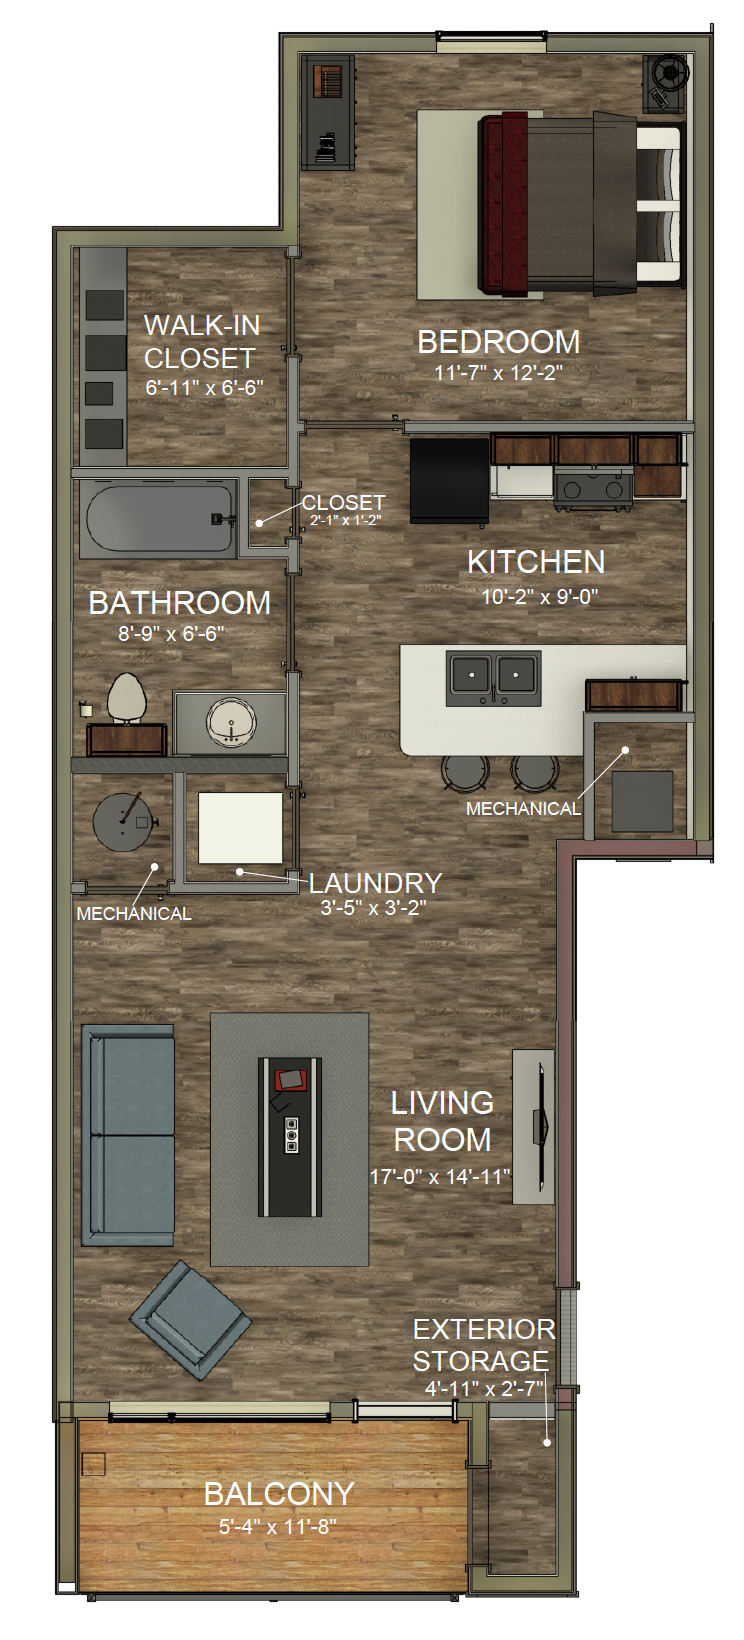 MountainView - 1 BED